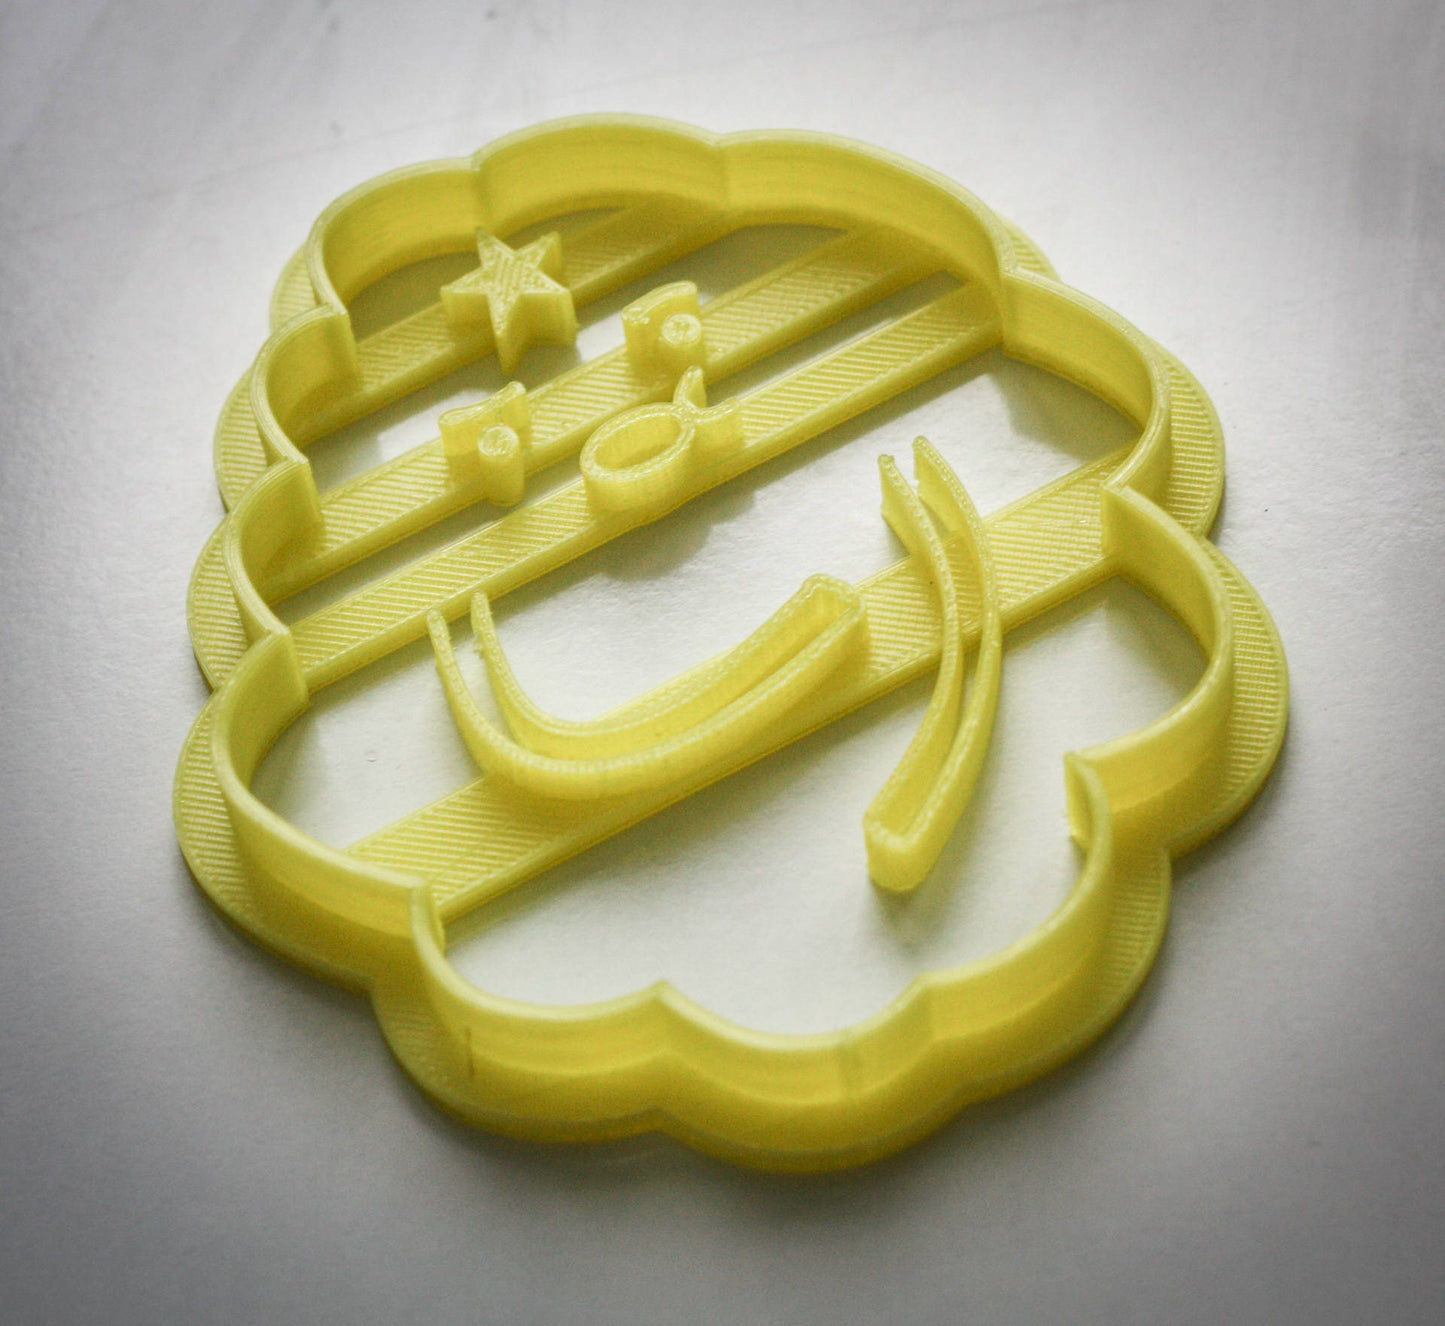 Lumpy Space Princess | AT Cookie Cutter Baking Gifts |designer cutters | biscuit cutters | Cutters cookie stamp Finn and Jake - 3DPrintProps